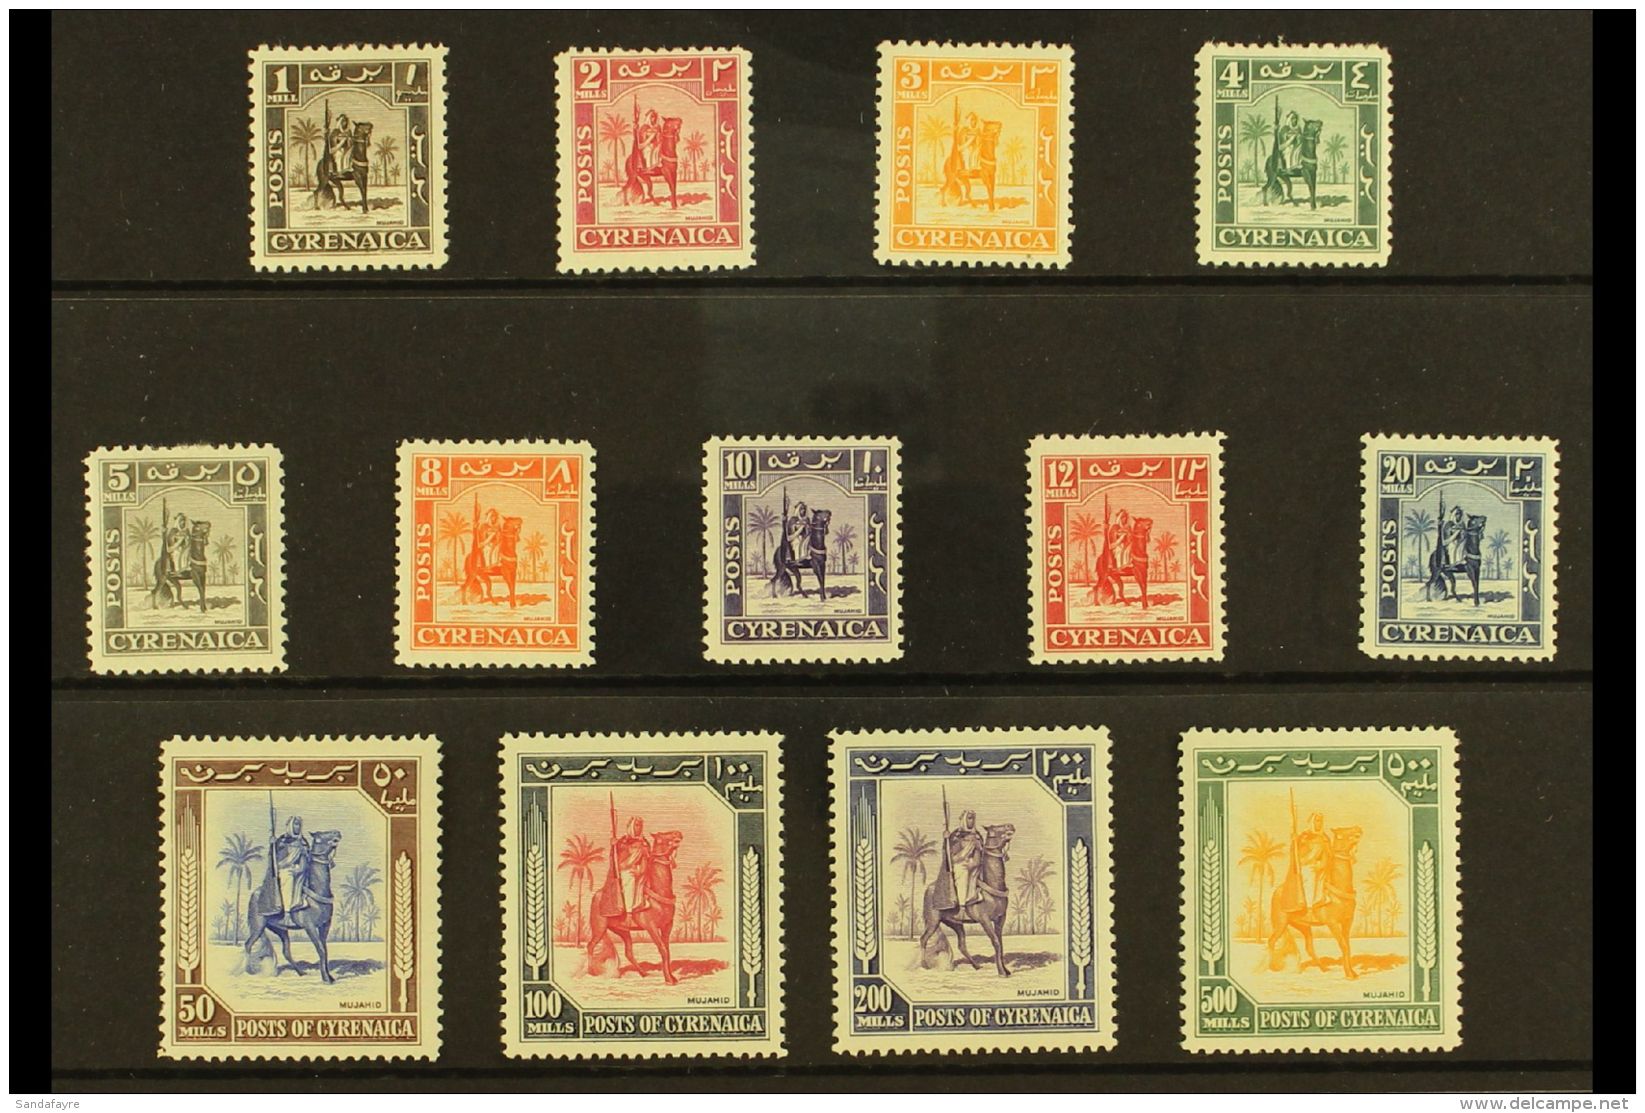 CYRENAICA  1950 "Mounted Warrior" Complete Definitive Set, SG 136/148, Very Fine Mint. (13 Stamps) For More... - Afrique Orientale Italienne